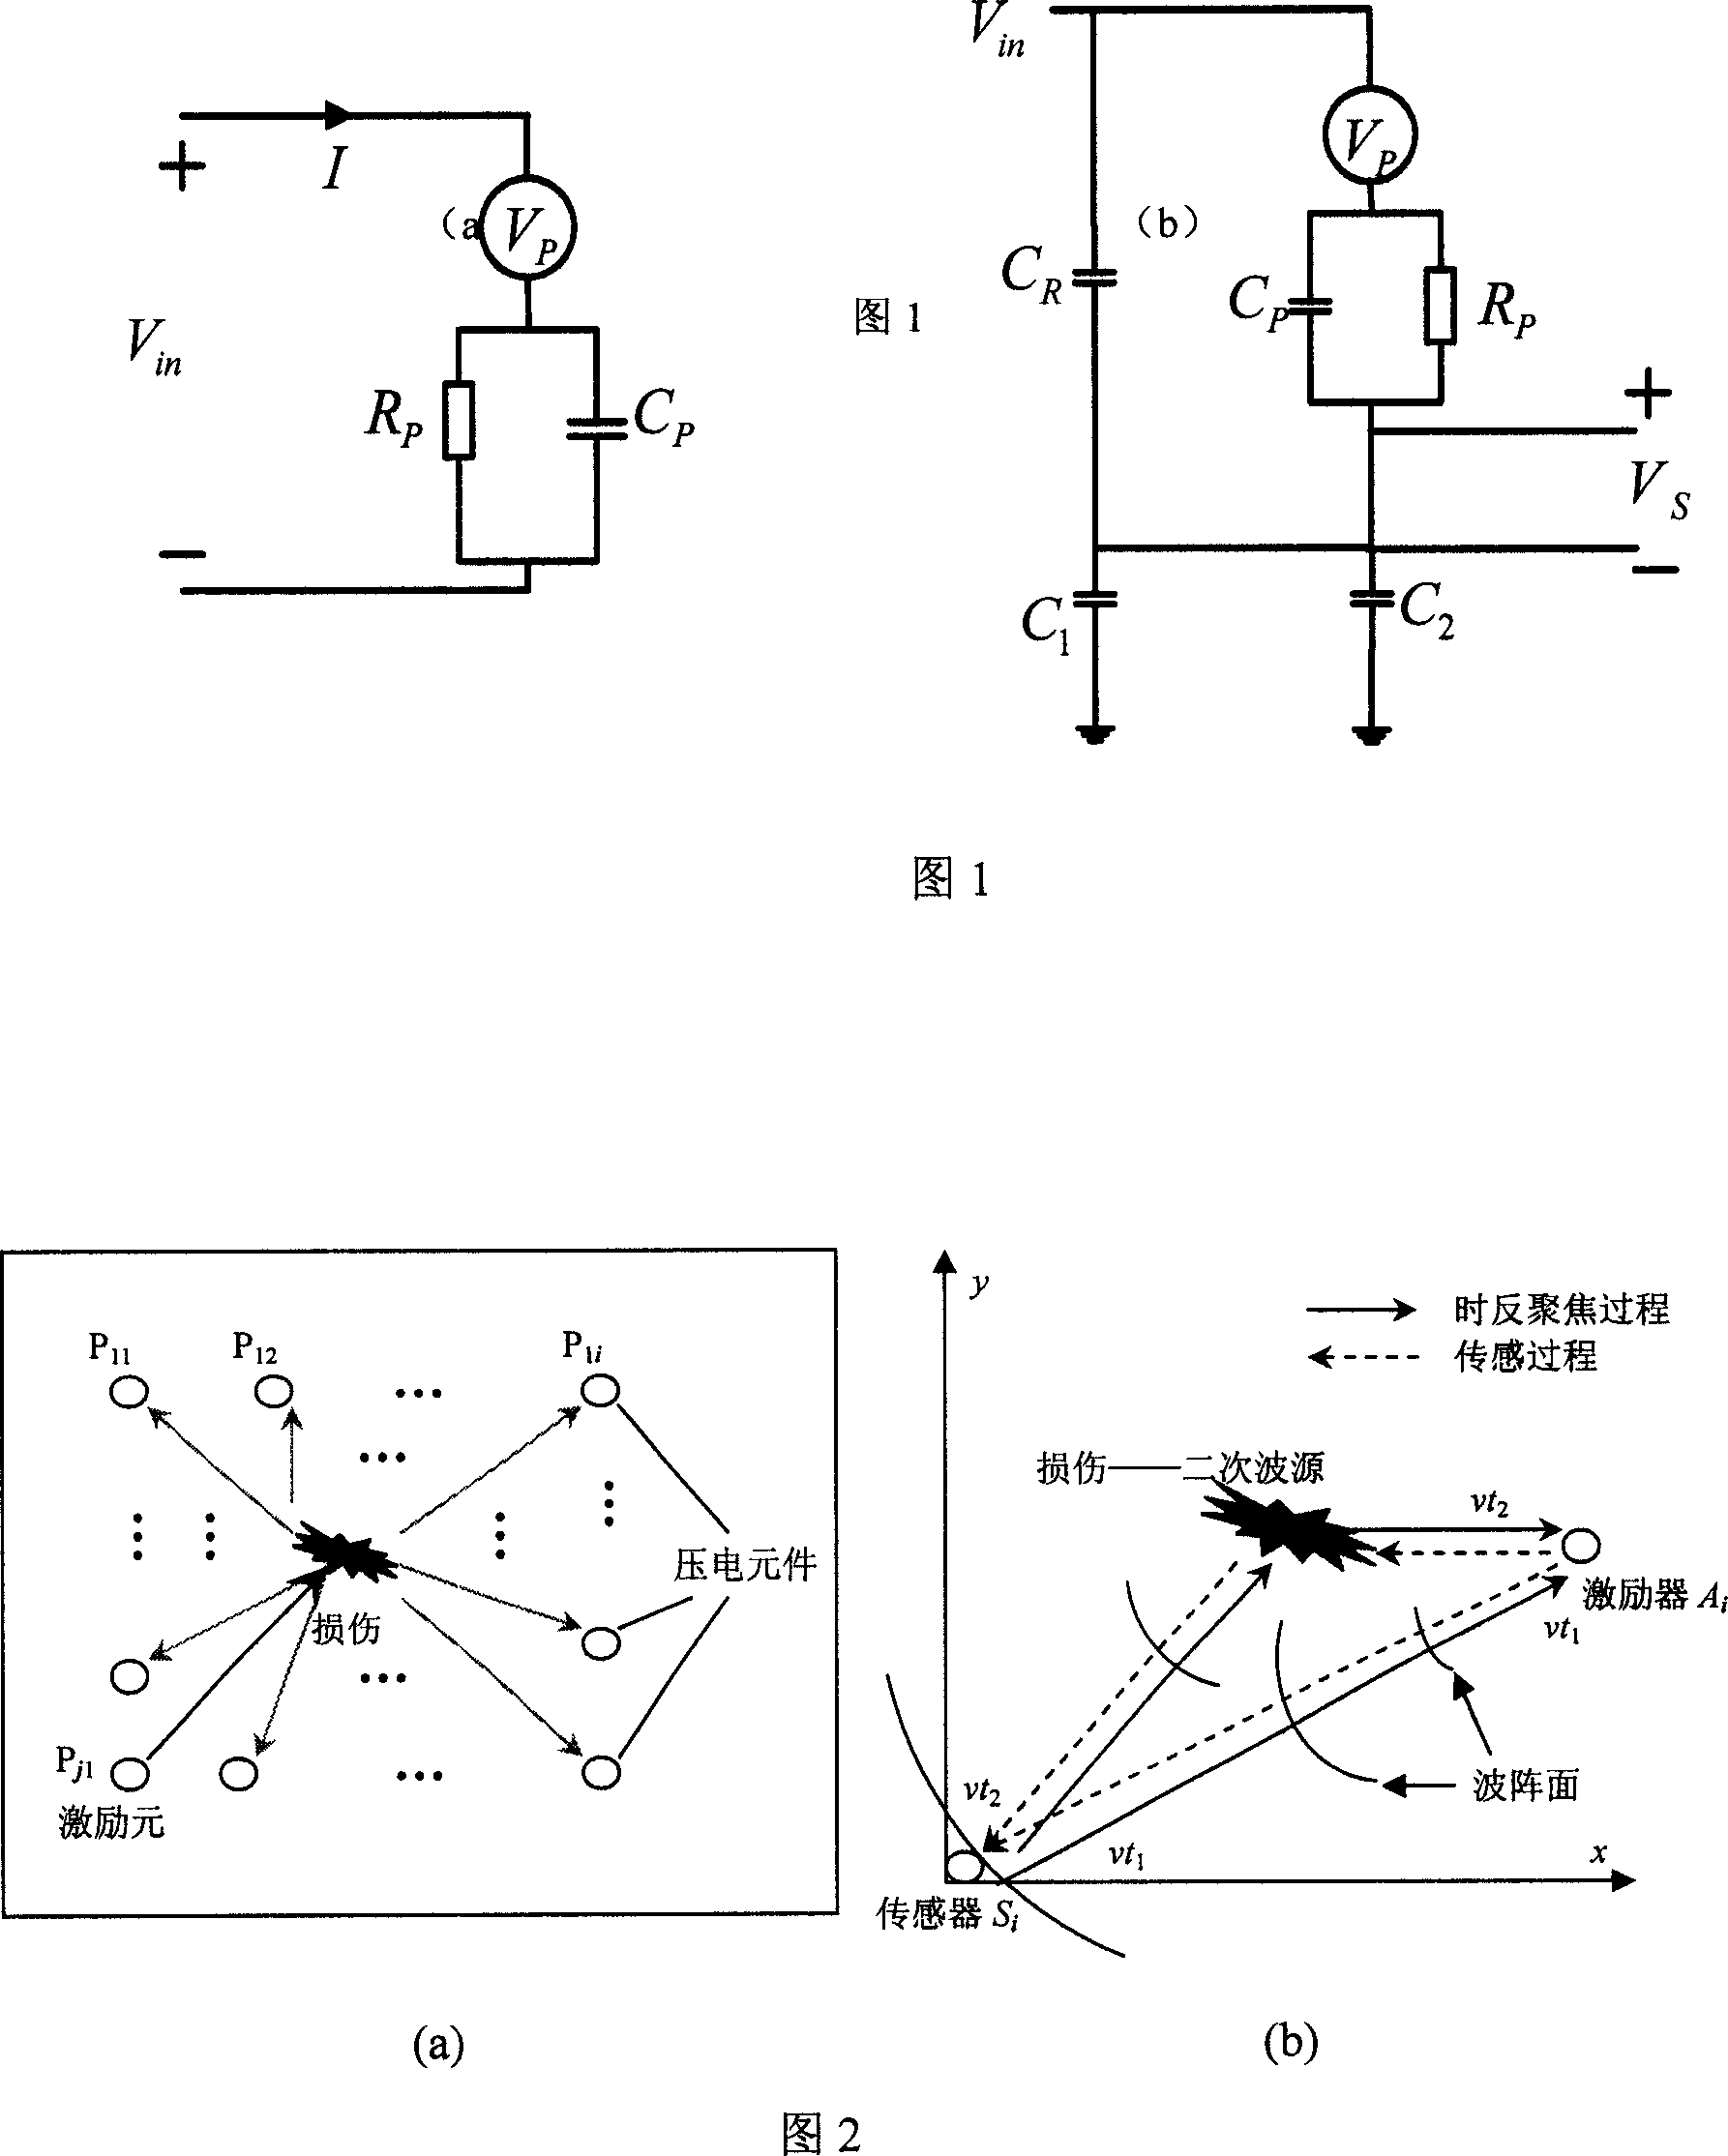 Method for investigating failure connection of engineering structure by signal focus